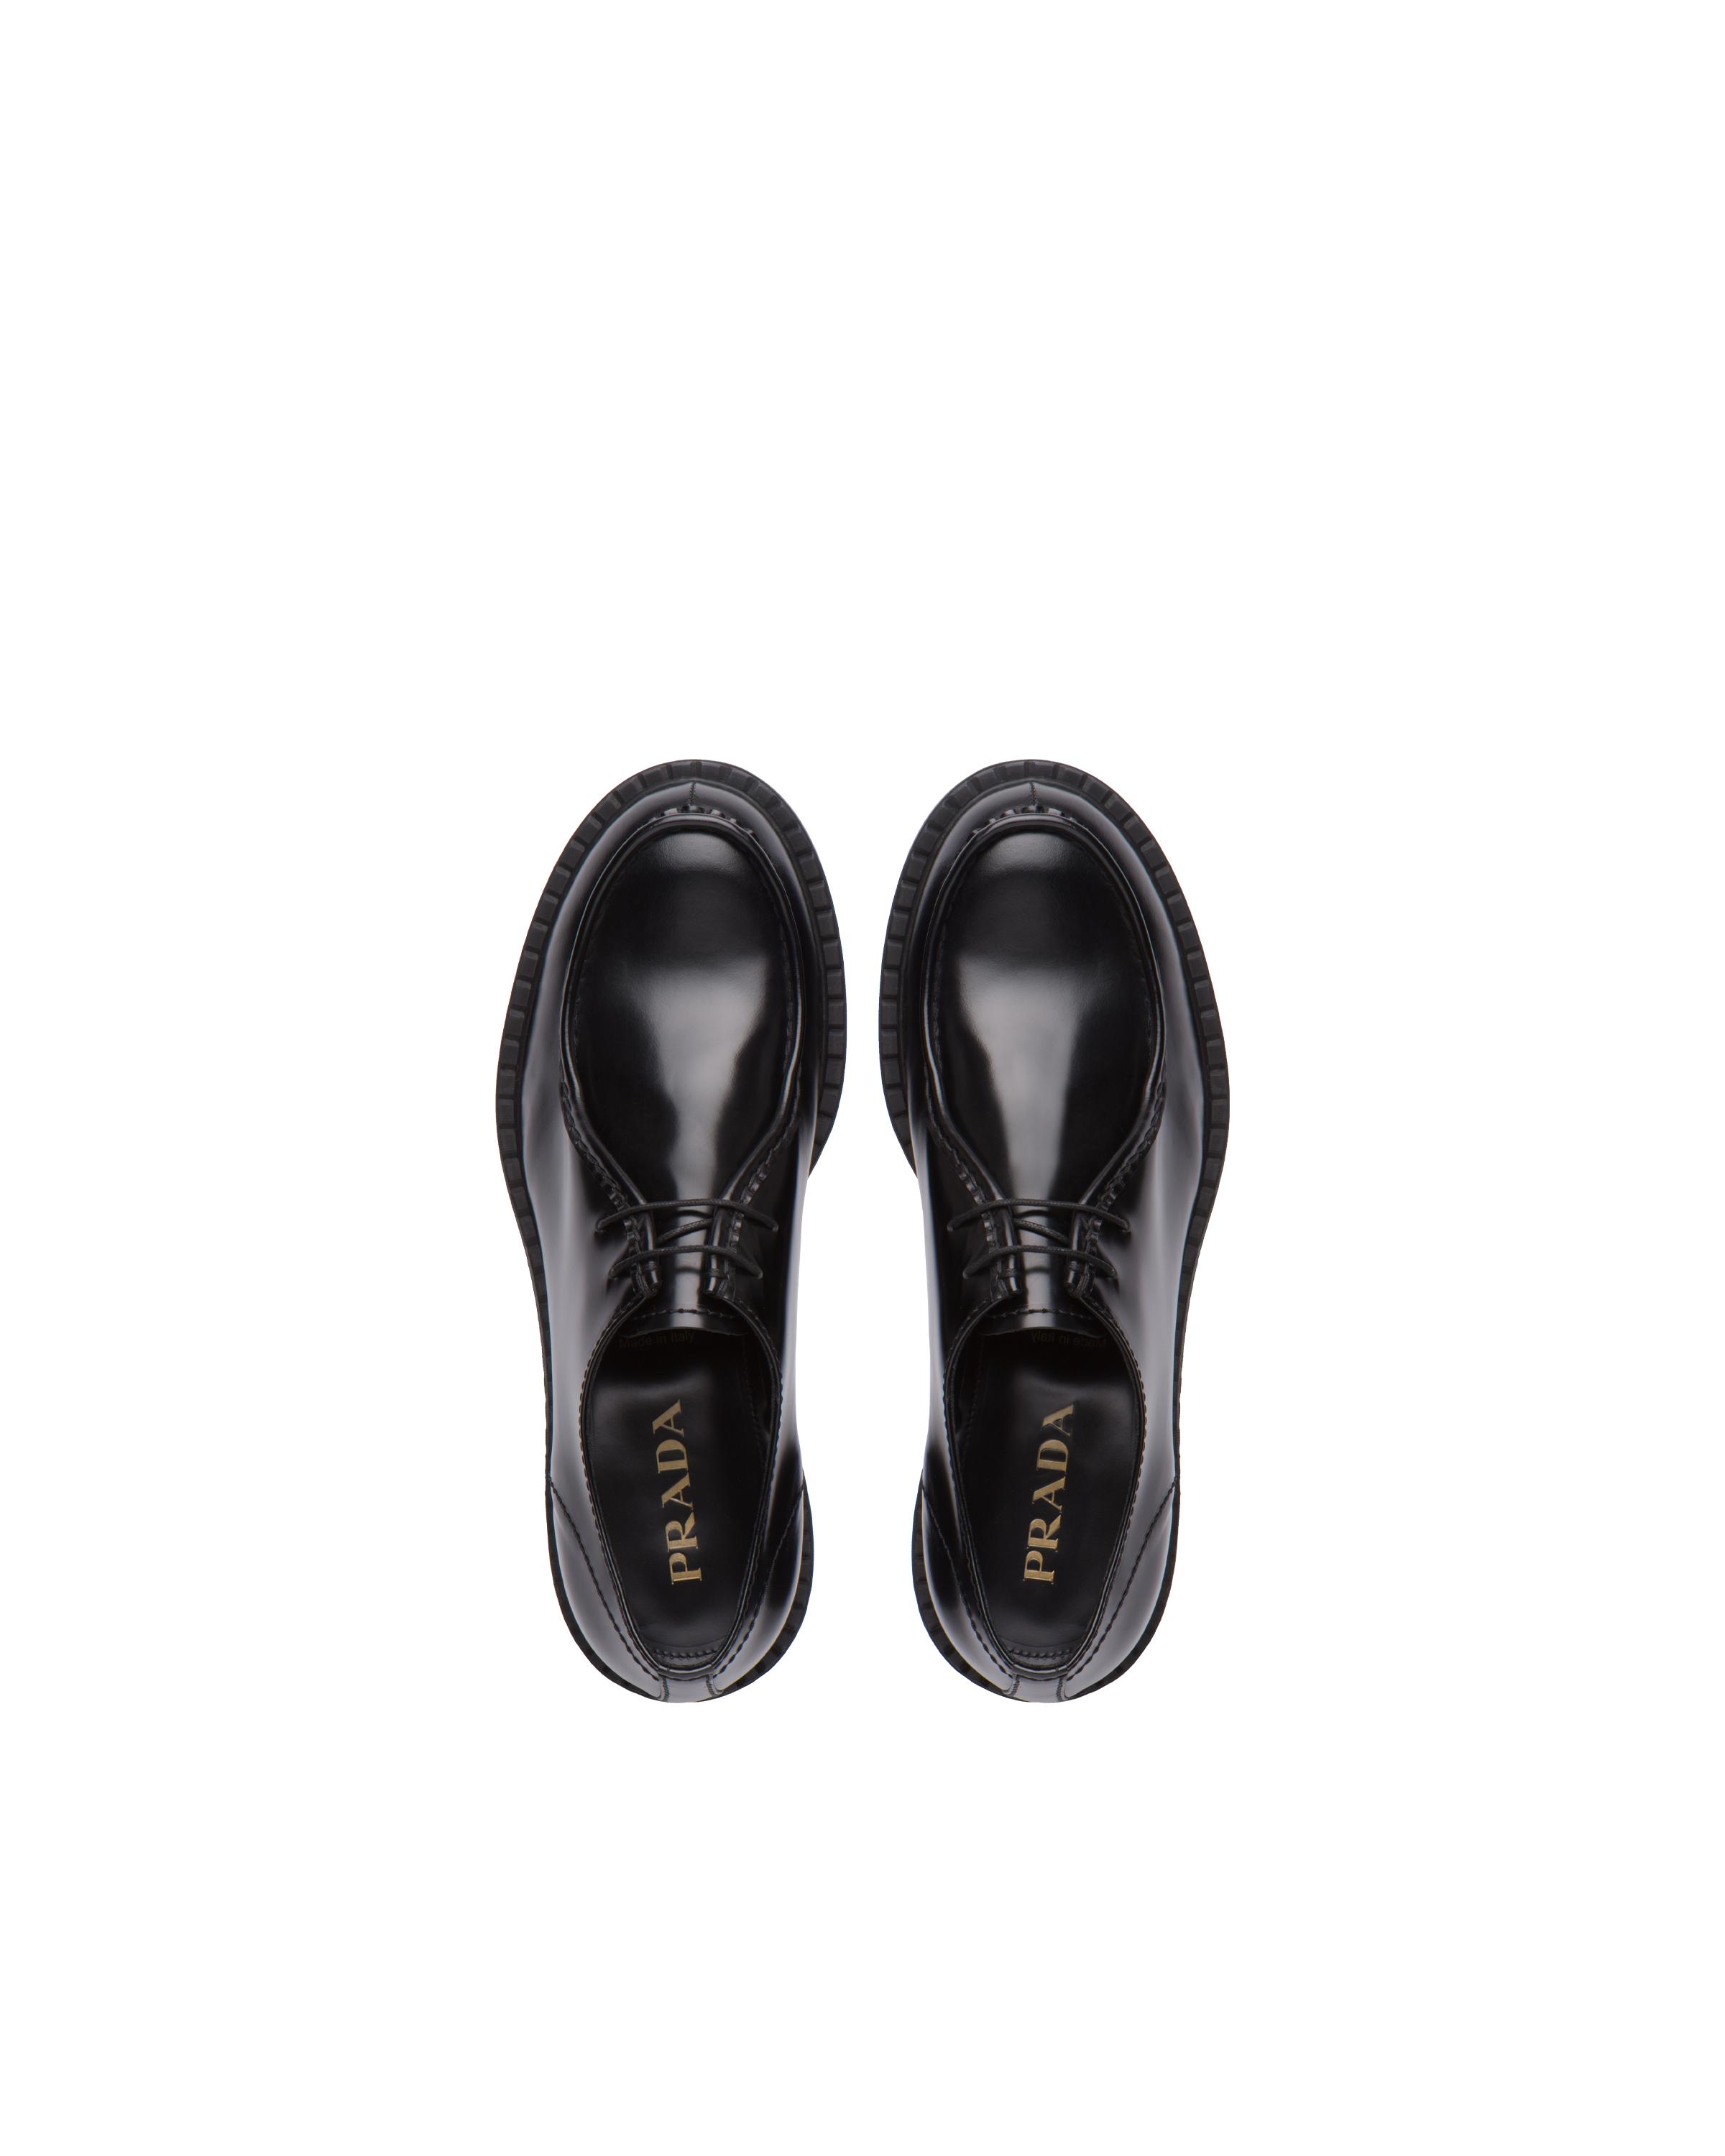 Prada Brushed Leather Laced Shoes in Black for Men - Lyst